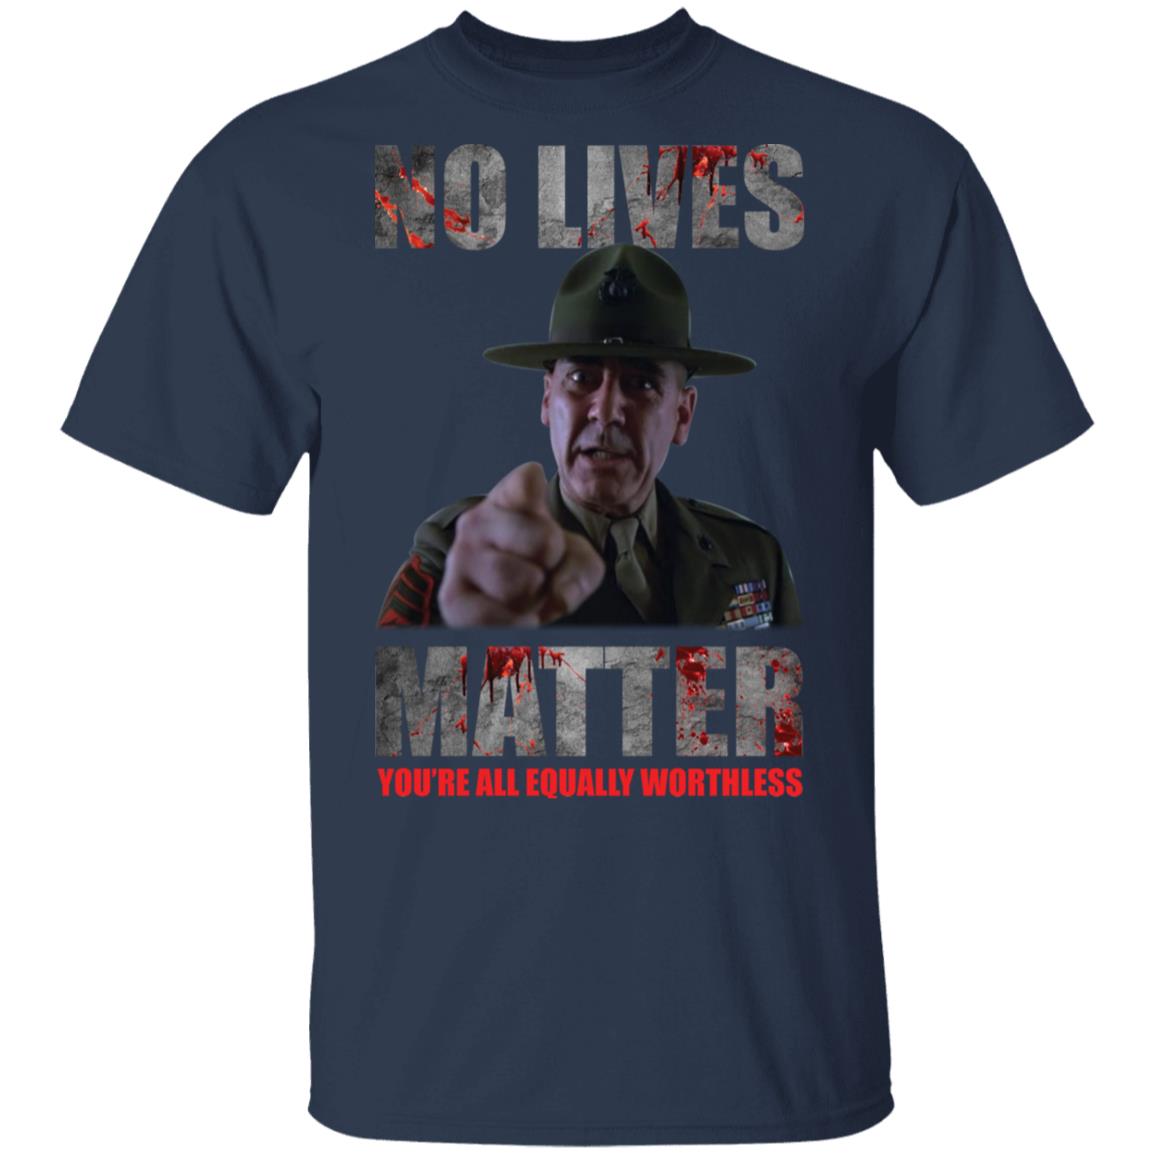 No lives matter you're all equally worthless shirt, hoodie